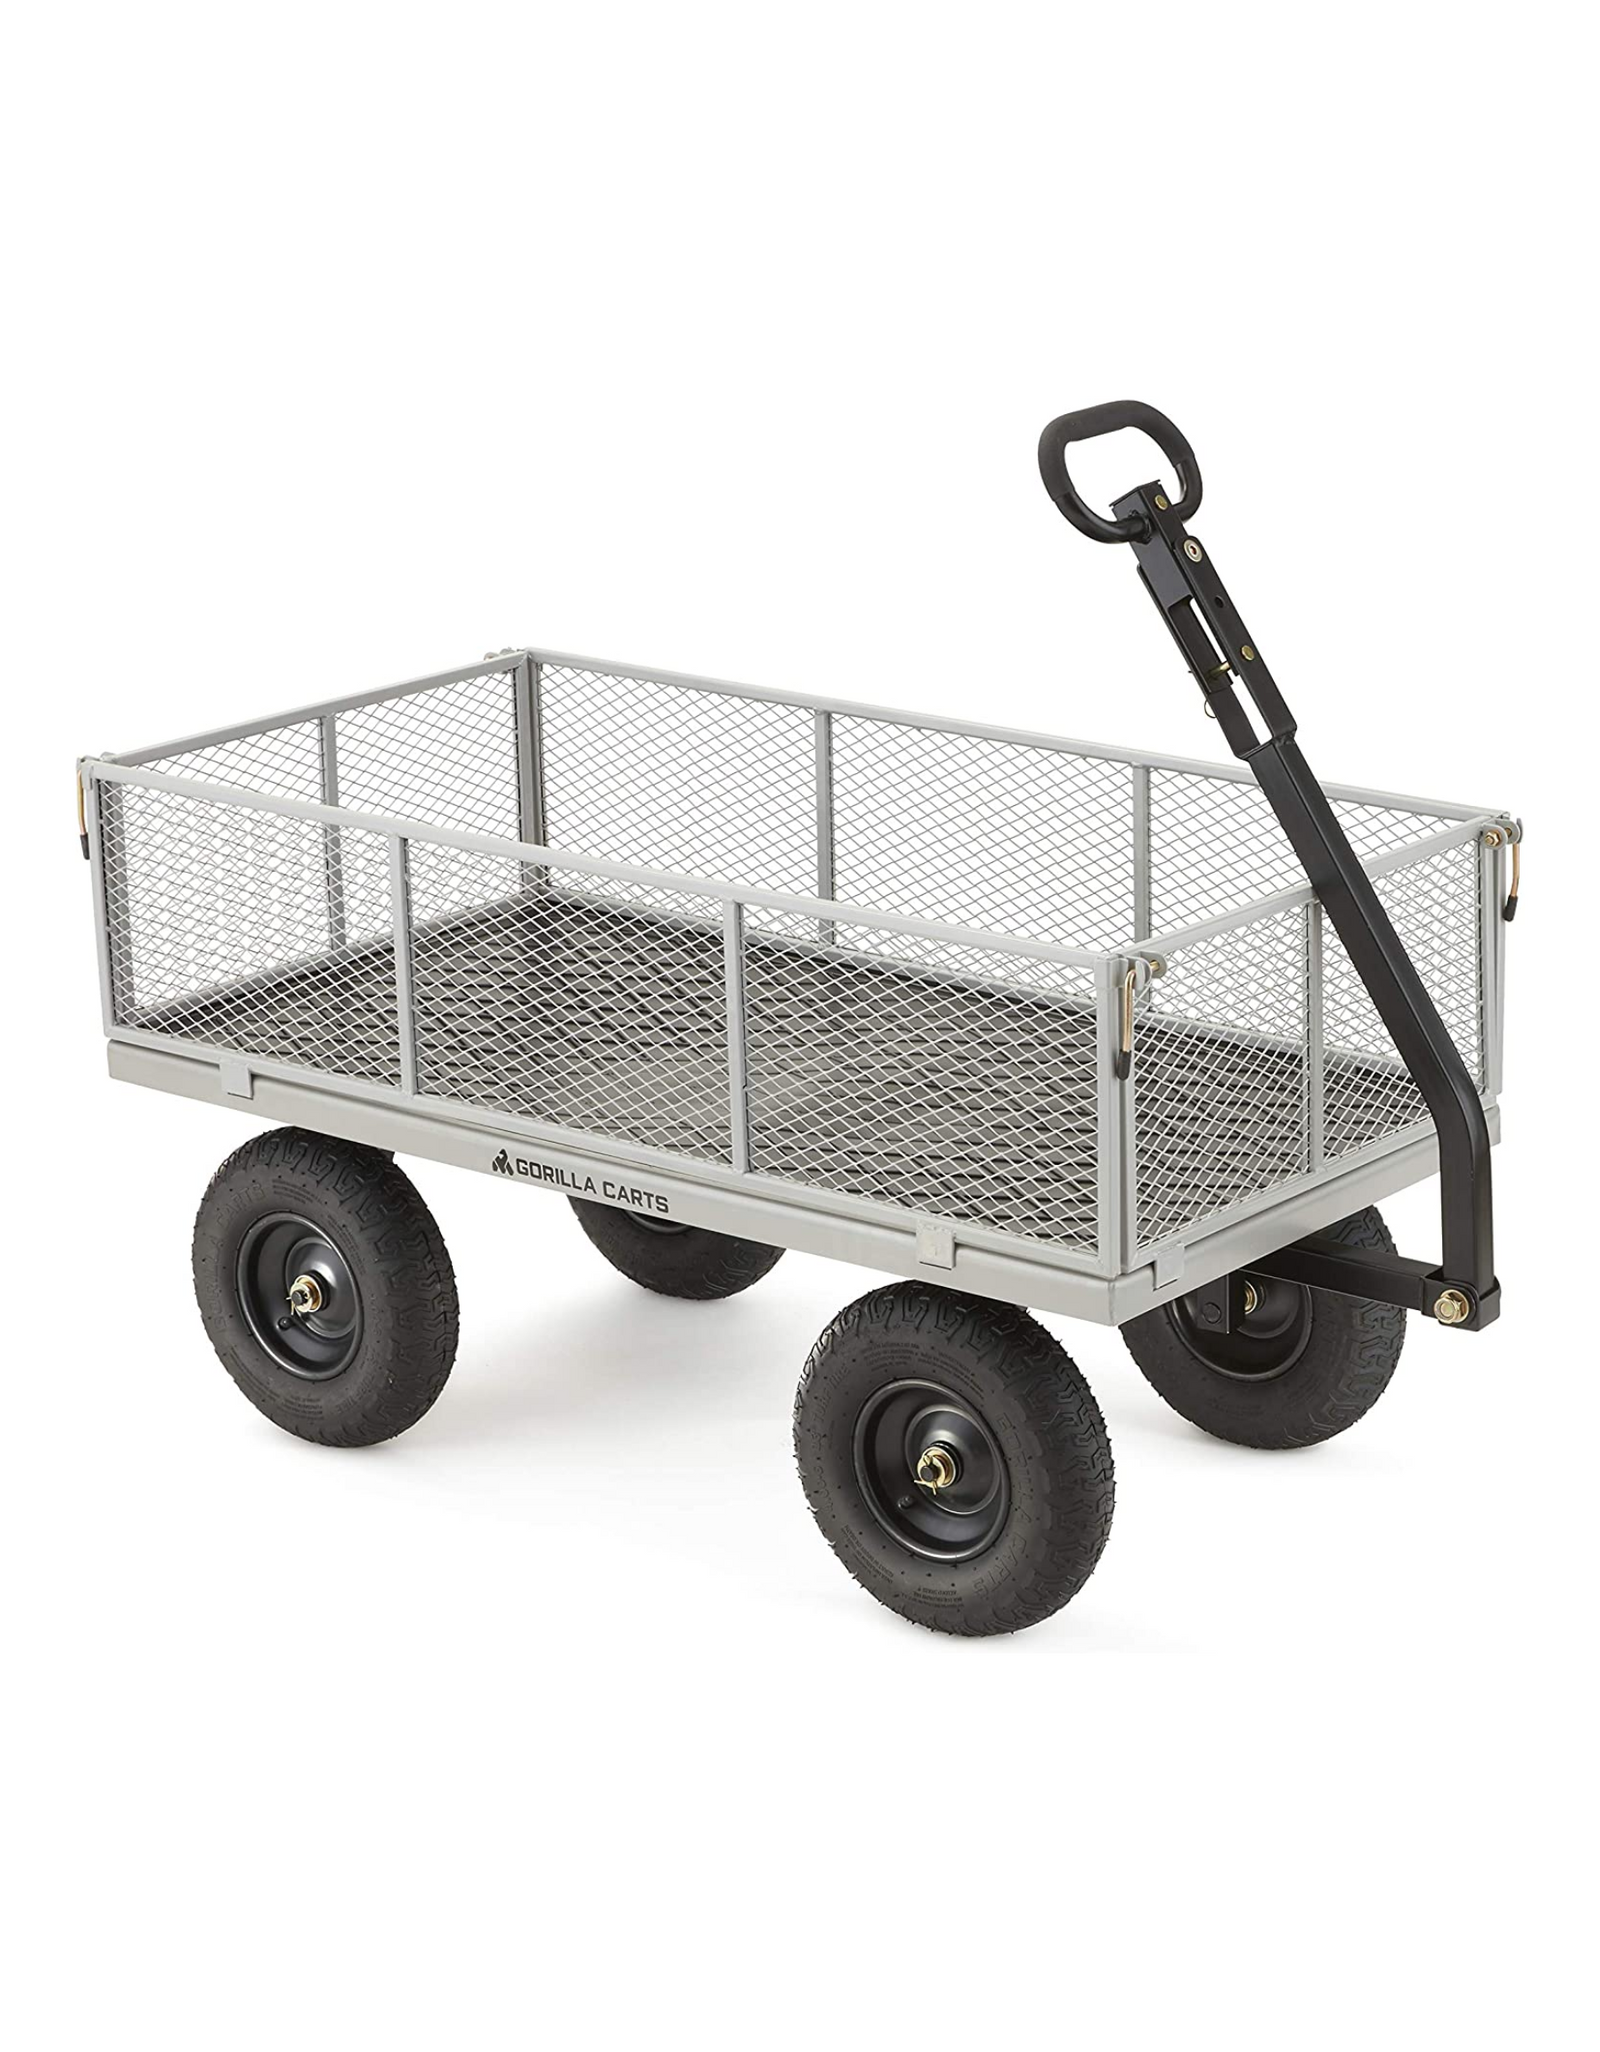 Gorilla Carts GOR1001-COM Heavy-Duty Steel Utility Cart, 1000 lbs. Capacity with Removable Sides, Gray